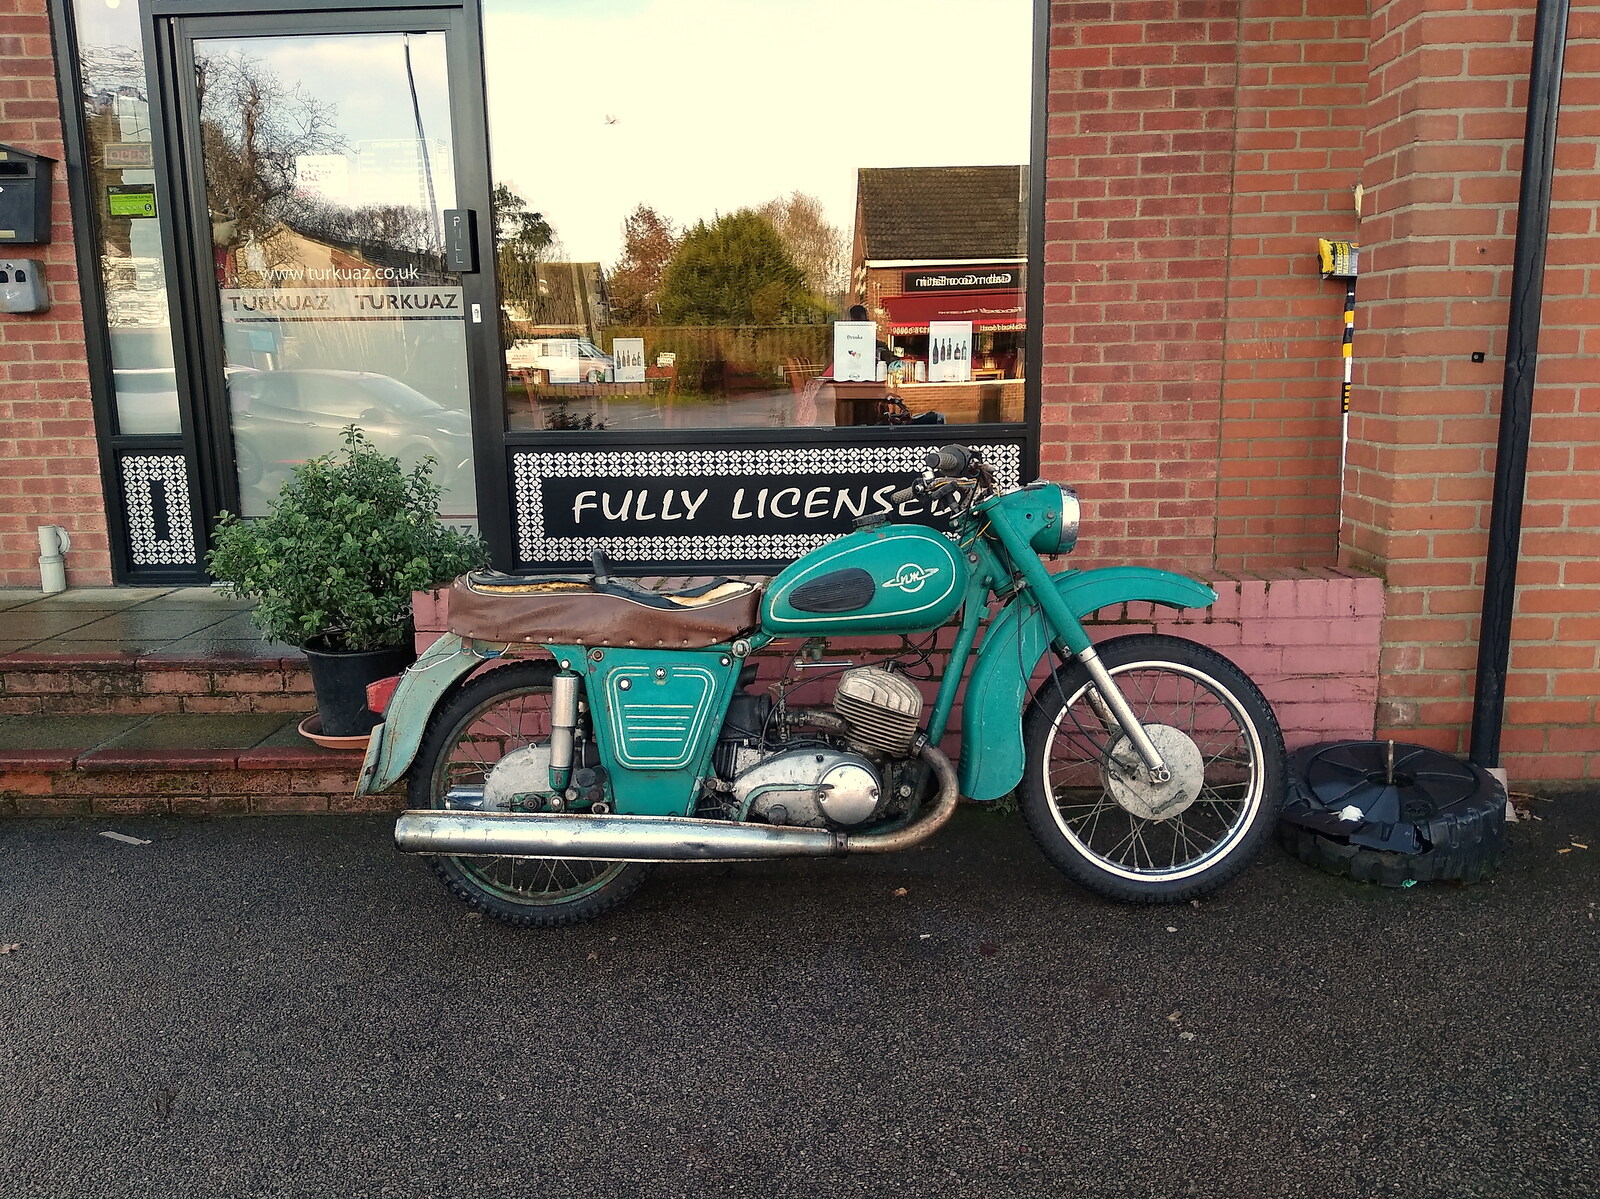 There's a cool old motorbike outside Turkuaz from Dove Players' Trouble in Pantoland, Eye Community Centre, Suffolk - 11th December 2021